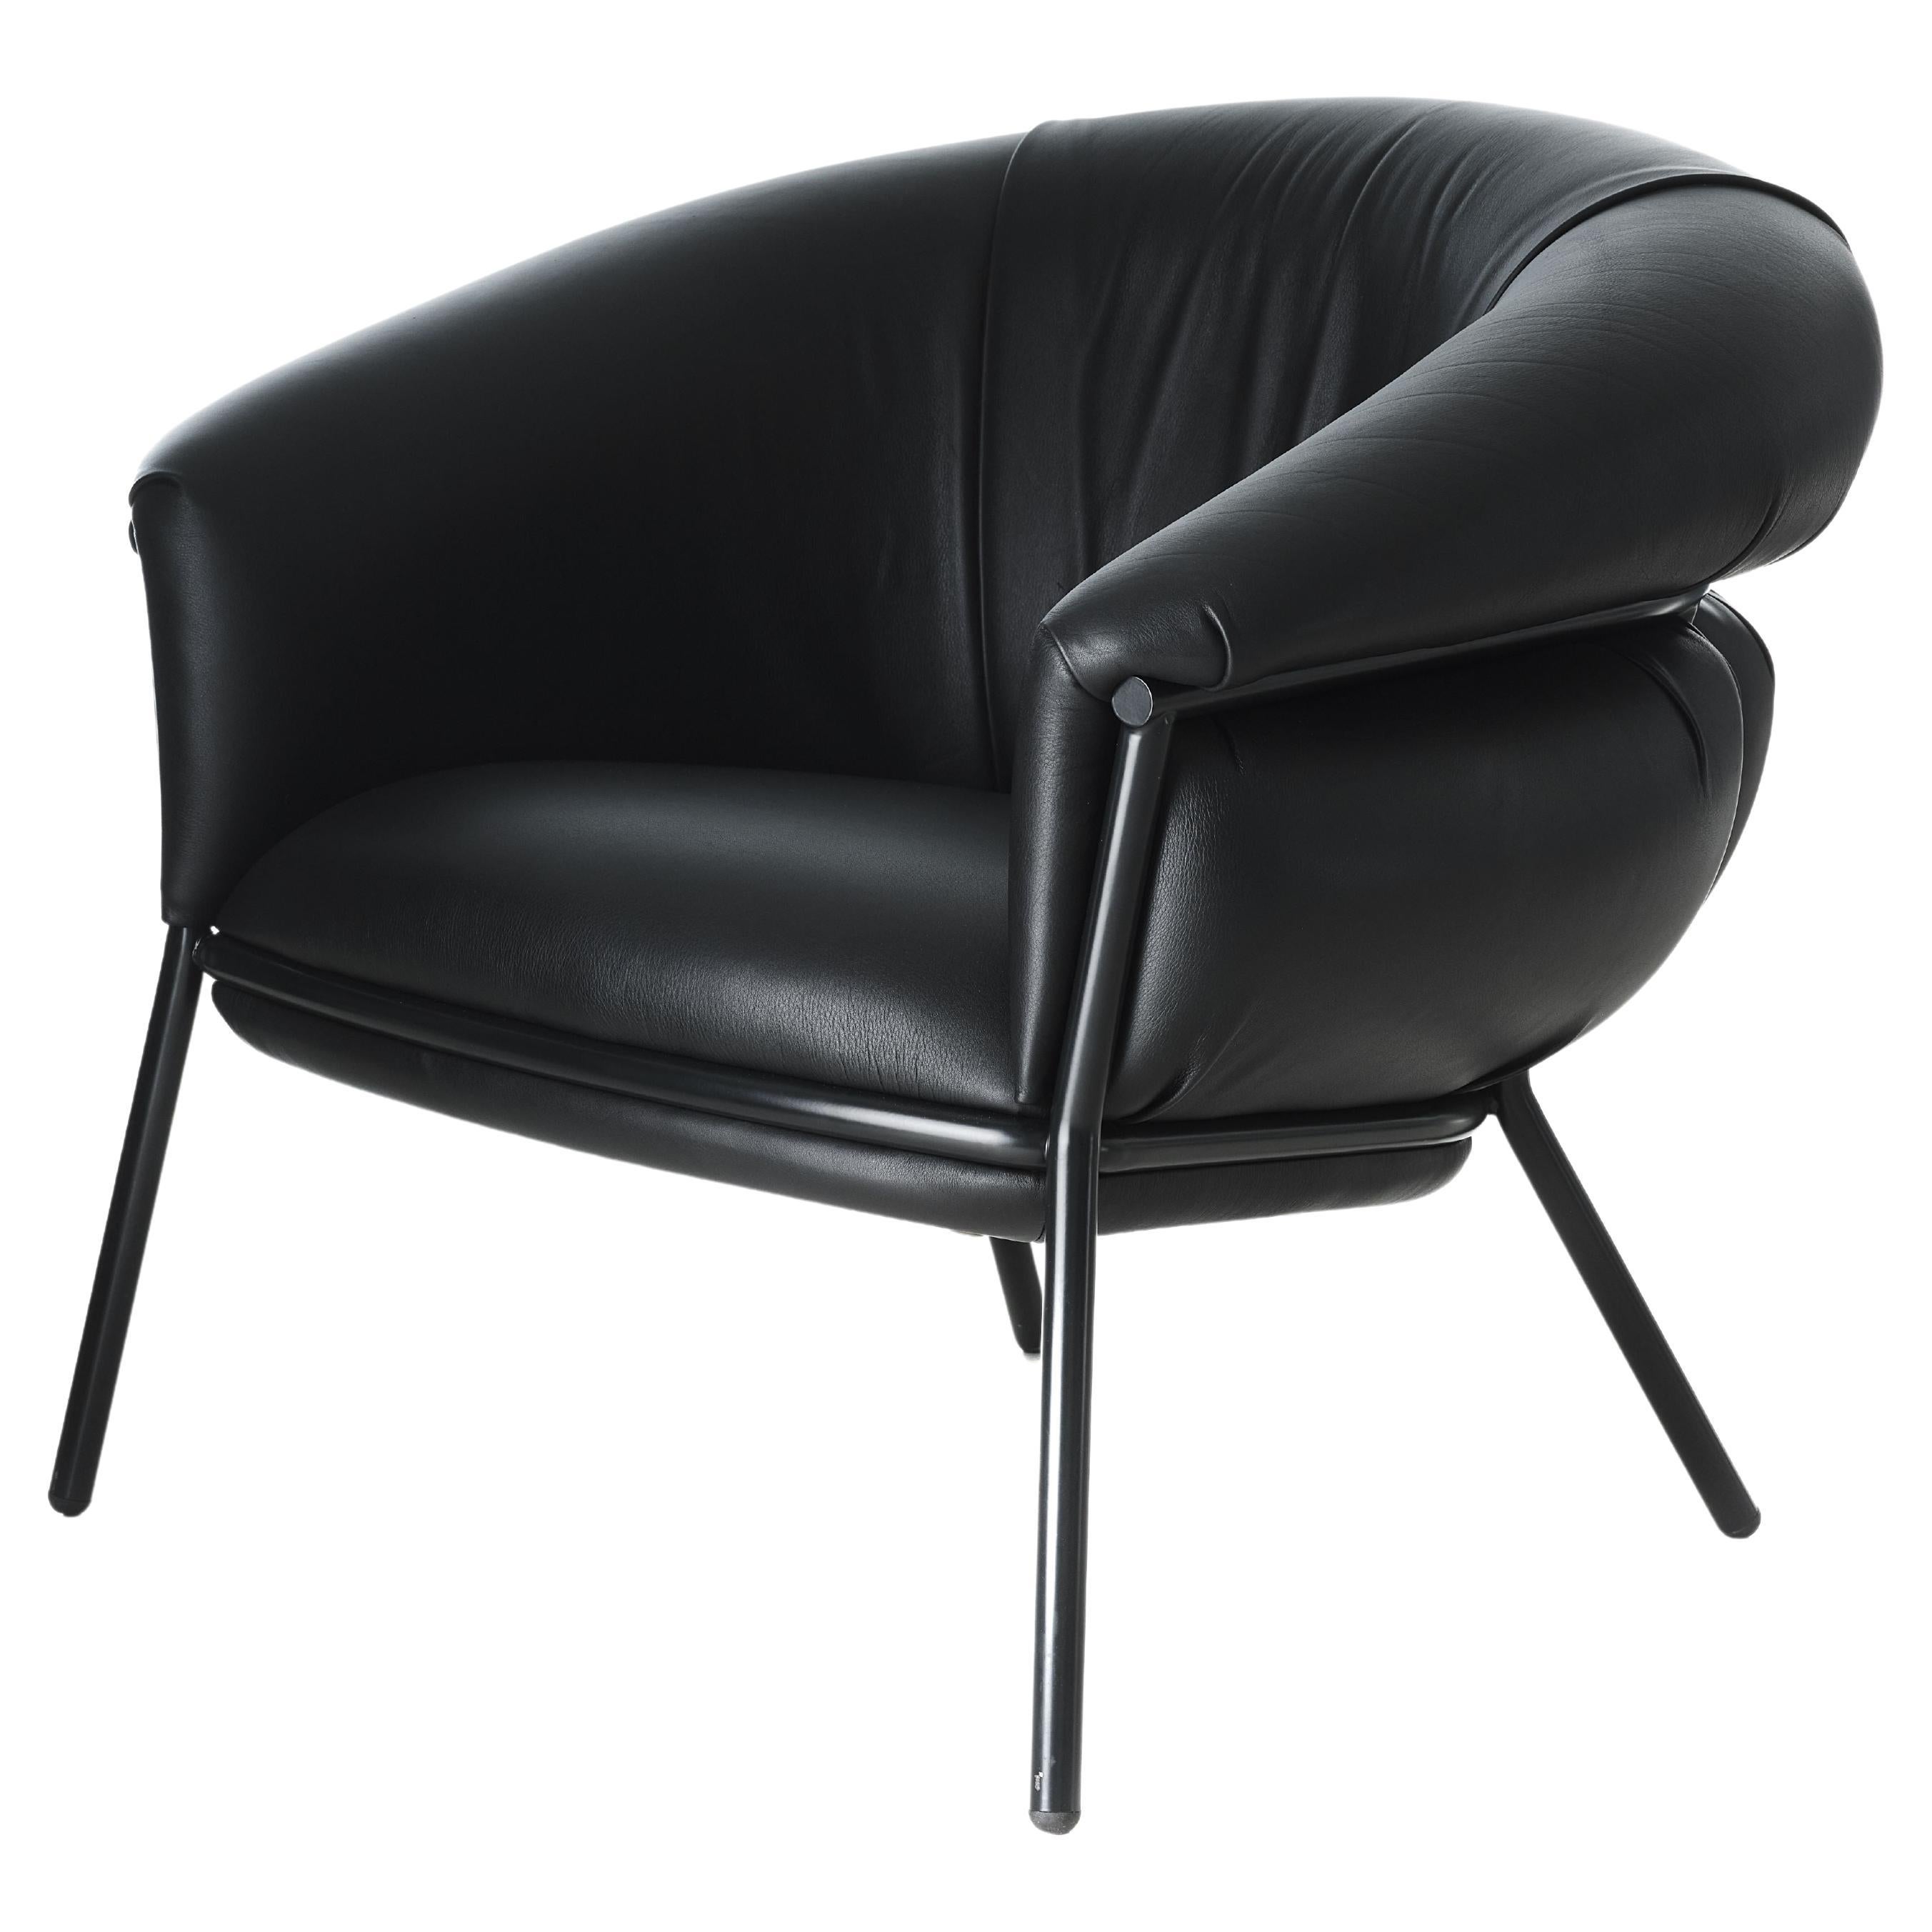 Grasso Armchair by Stephen Burks black padded leather upholstery black structure For Sale